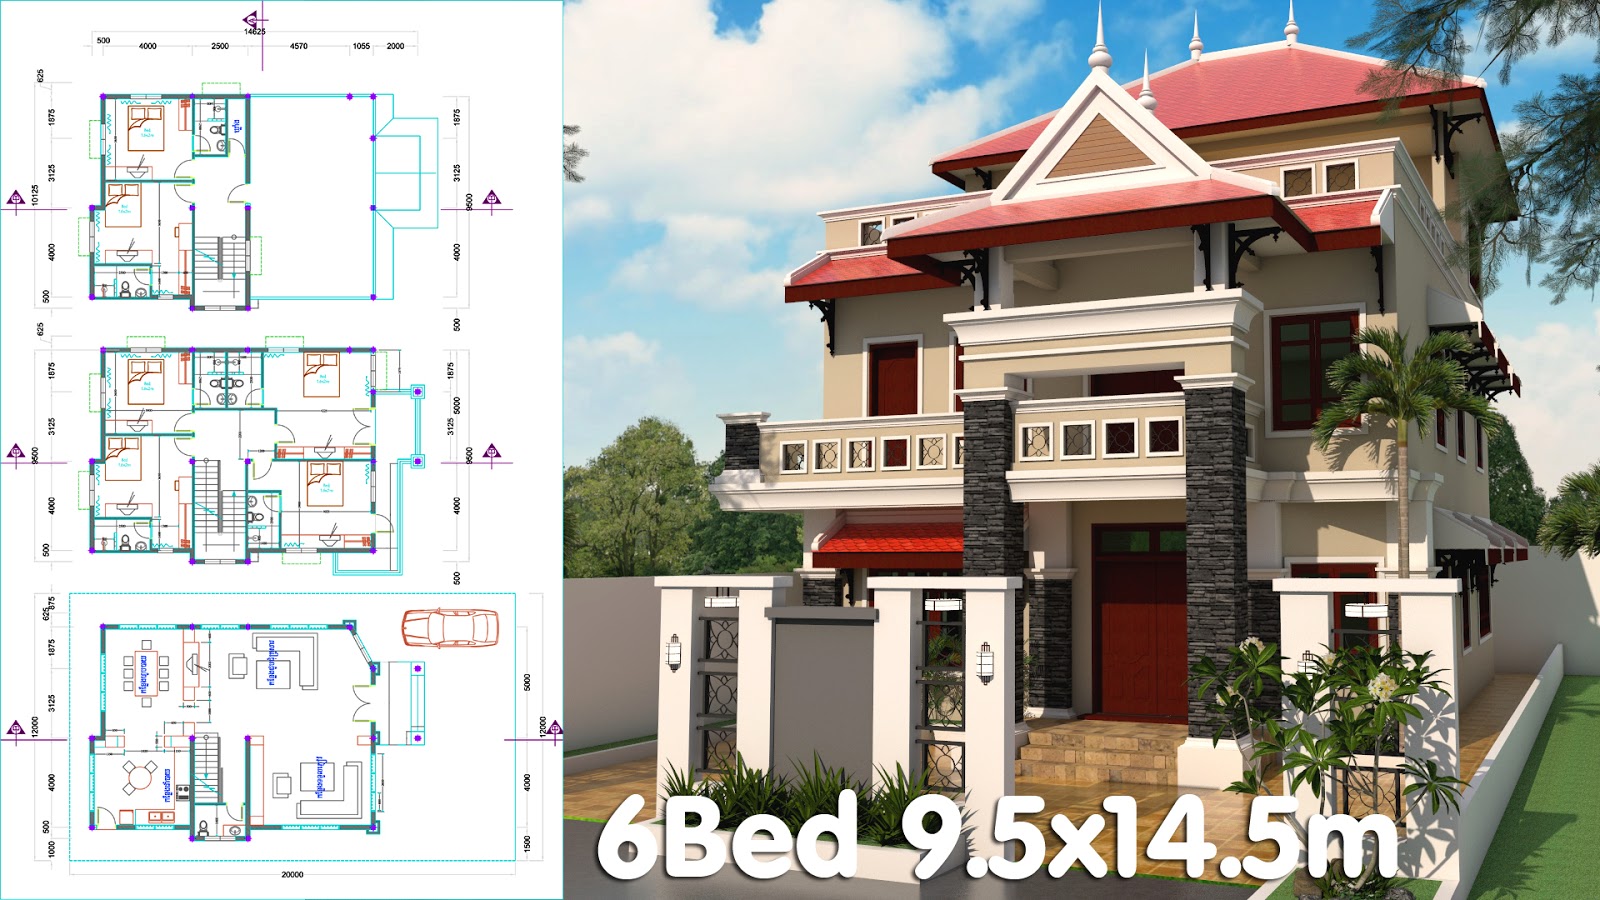  3  Story  House  Plan  9 5x14 5m with 6 Bedrooms Ma House  Plan 